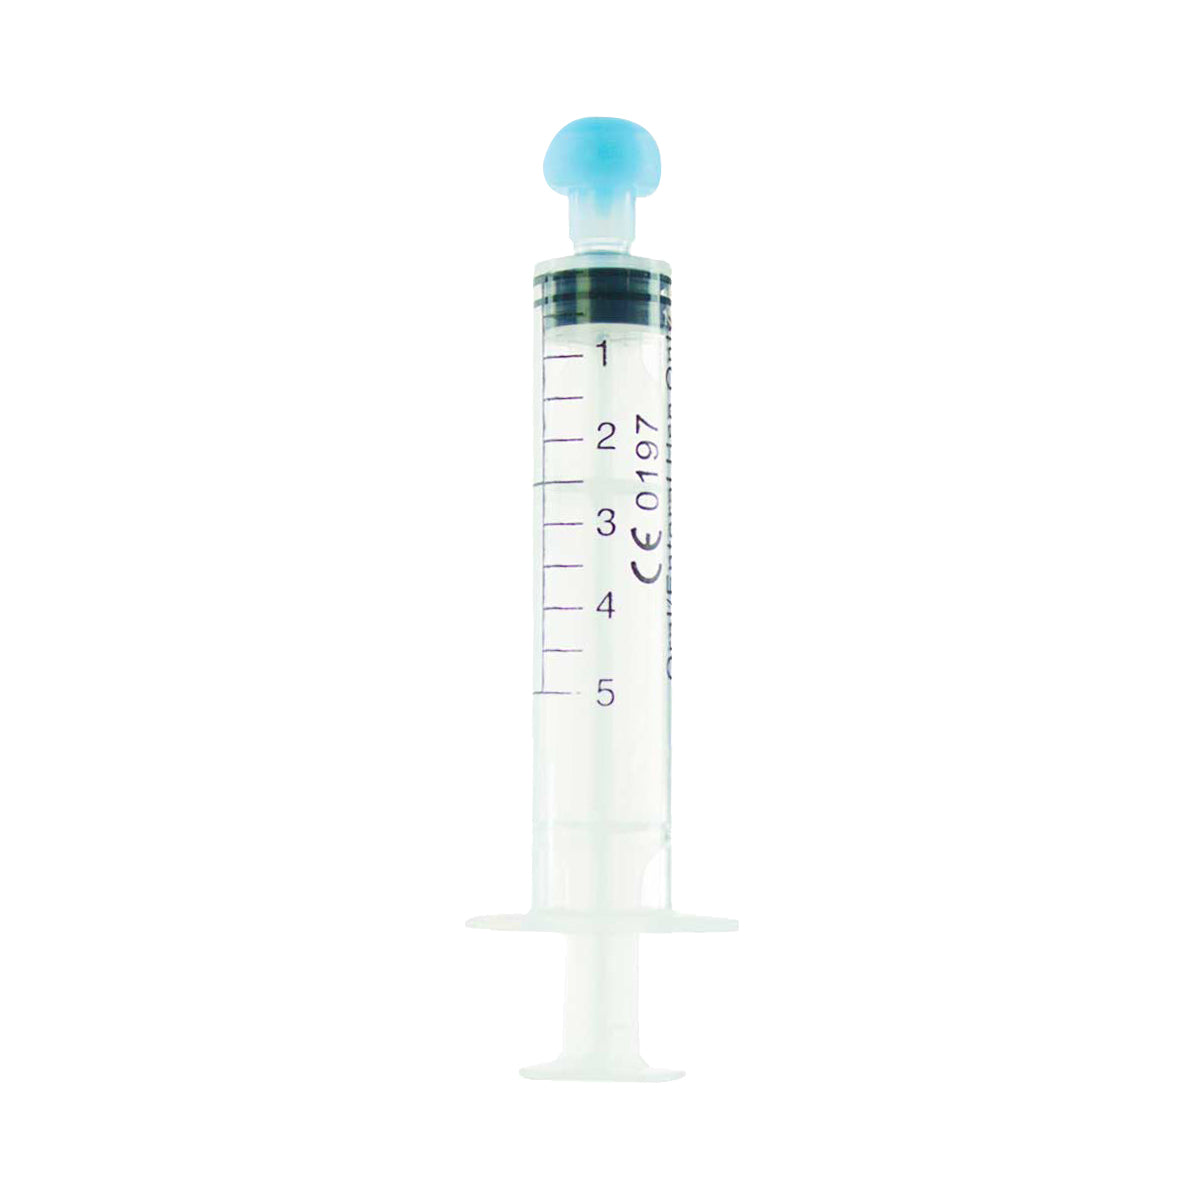 Concentrate Syringe | Oral Concentrate Syringes | 5mL - 1mL Increments - 100 Count Syringe Biohazard Inc   